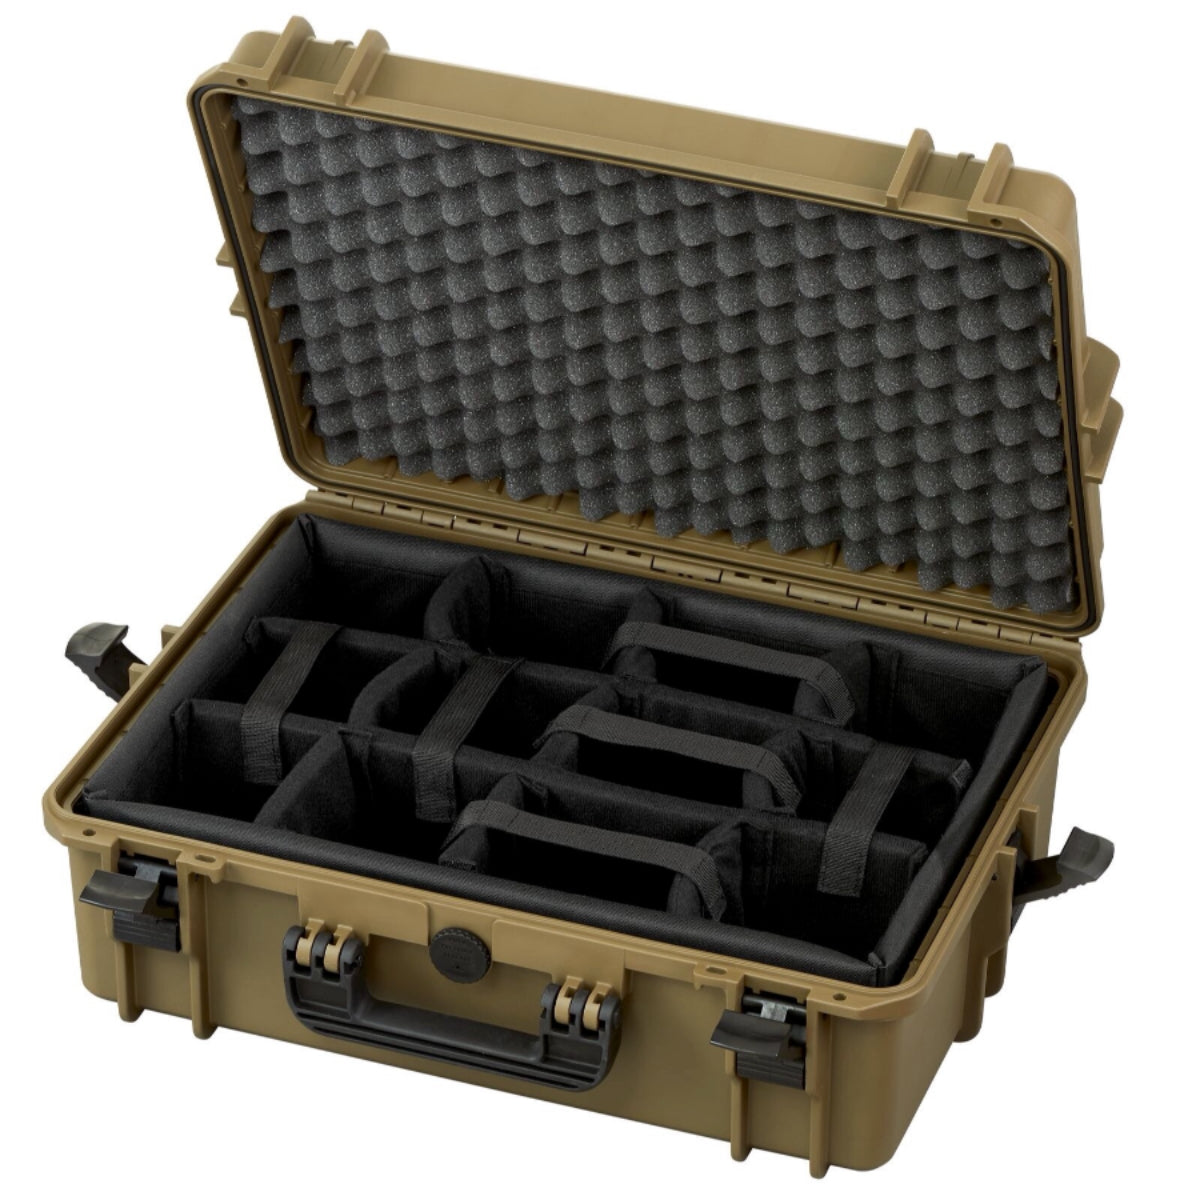 SP PRO 505CAMTR Sahara Trolley Case, Padded Dividers, ID: L500xW350xH194mm